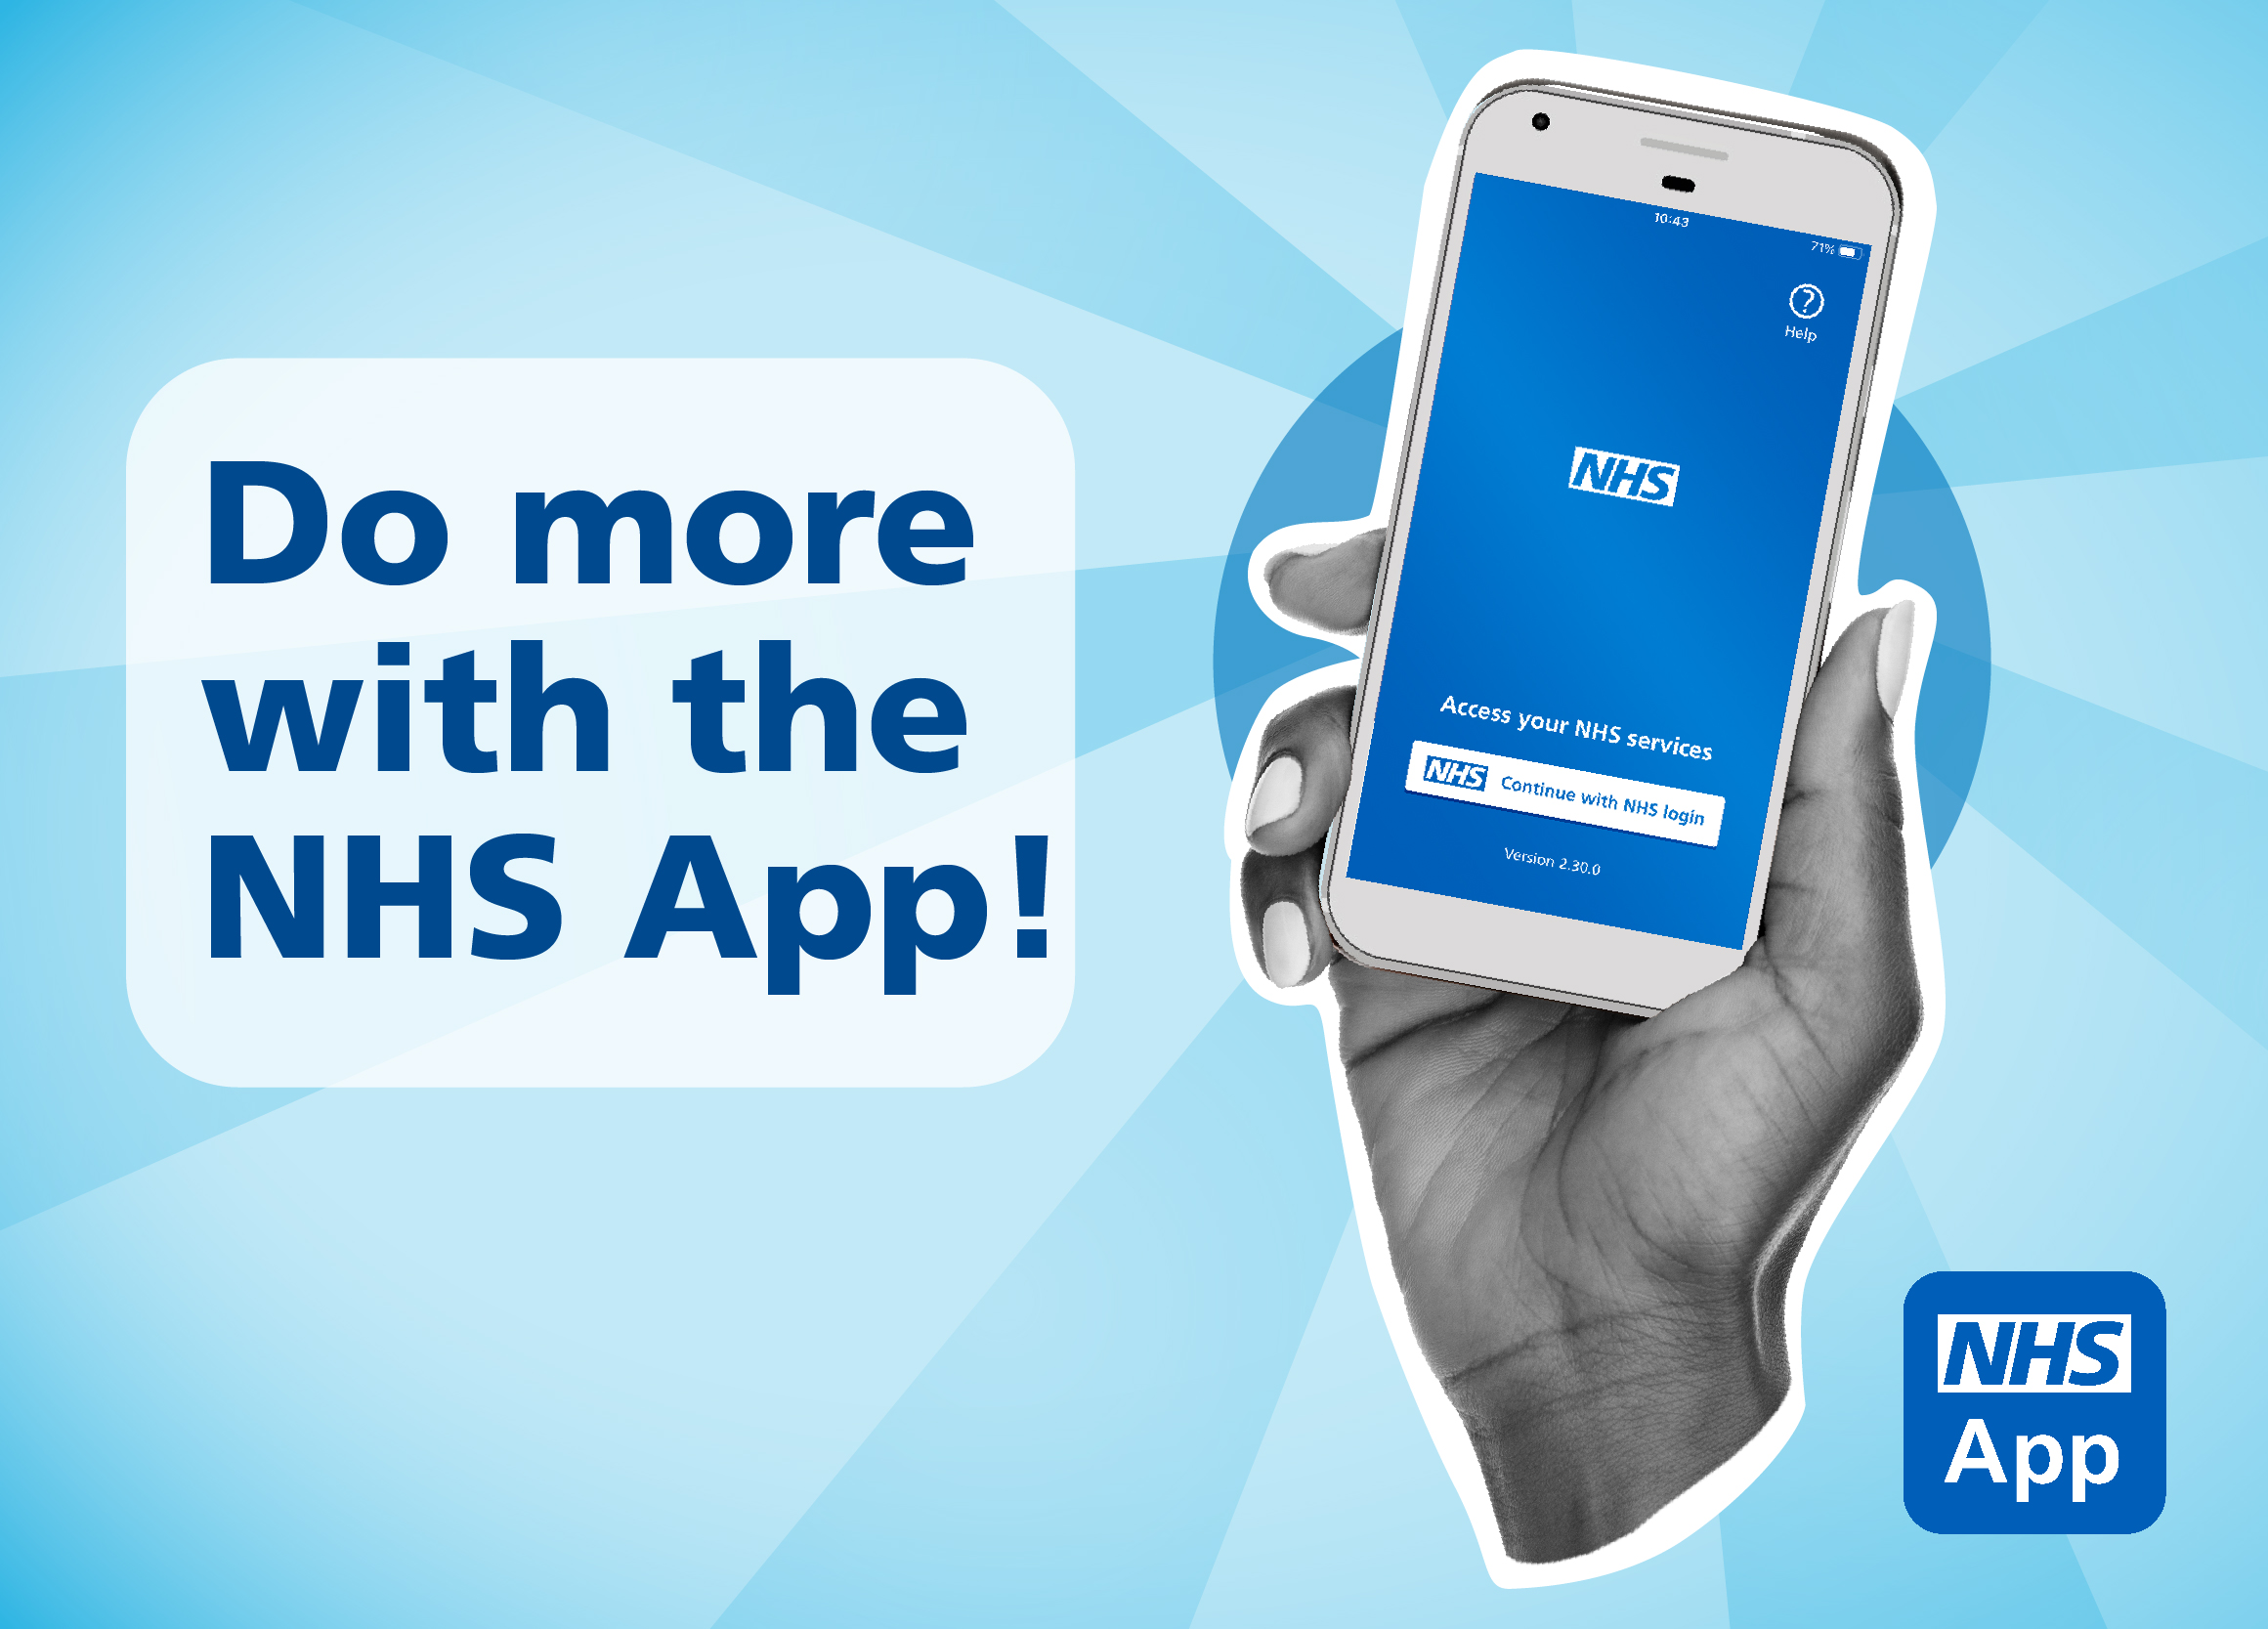 Do more with the NHS App!